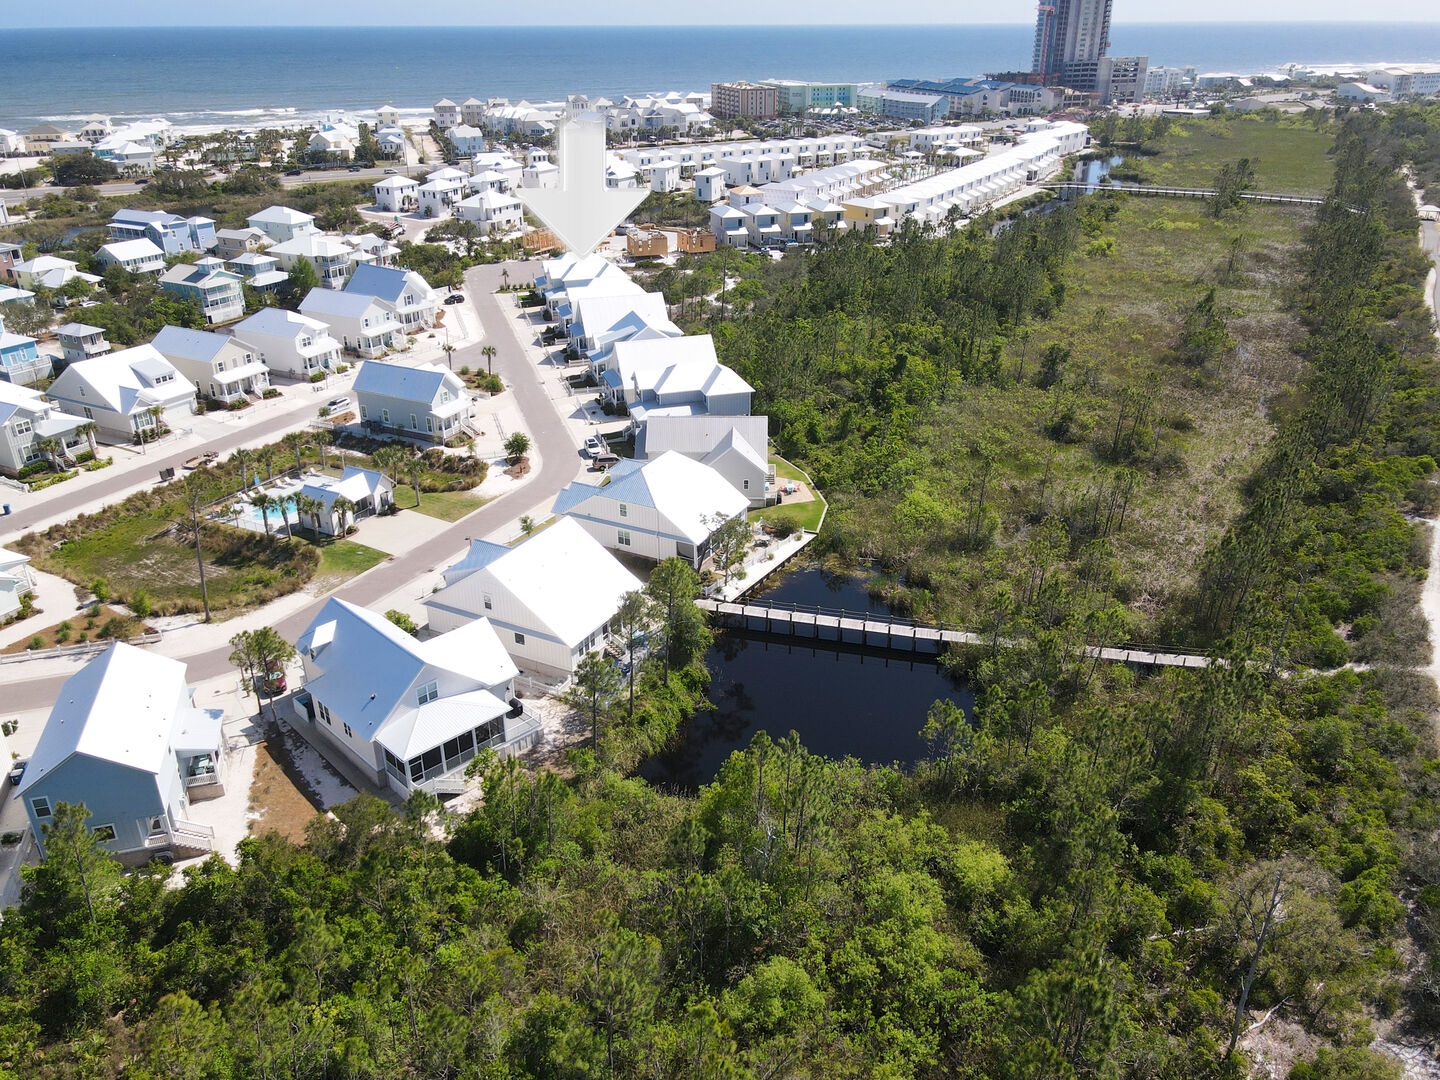 Ariel view of the Village of Tannin and the bridge to the Gulf State Park